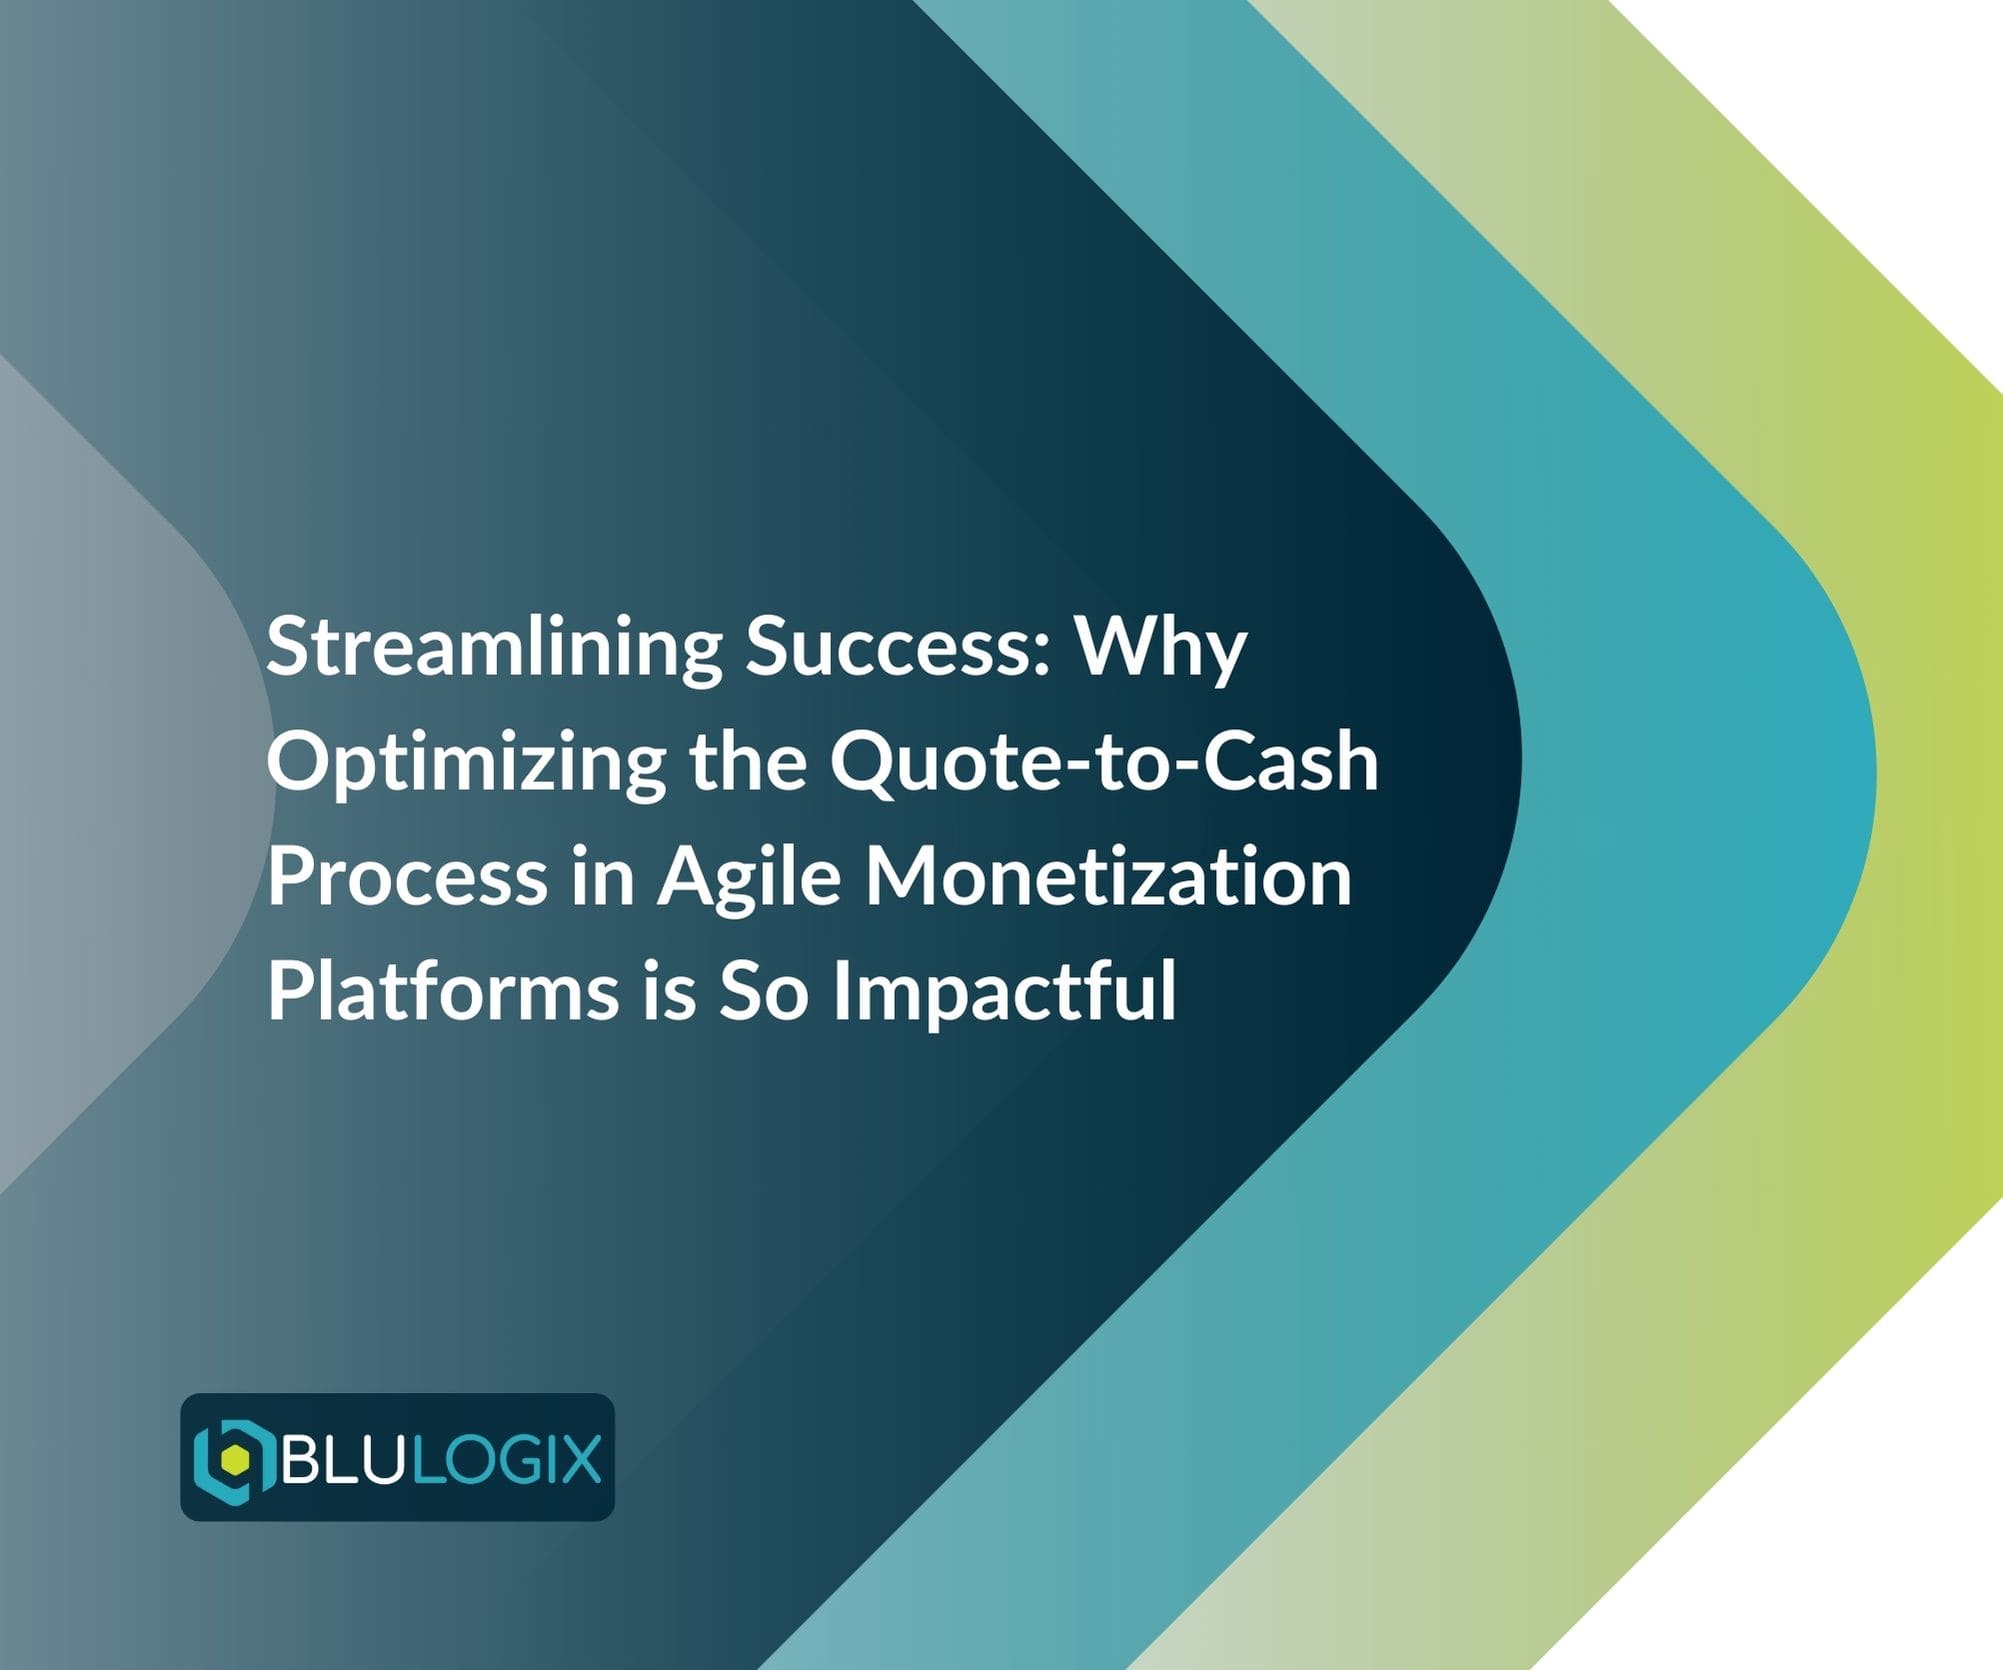 Streamlining Success Why Optimizing the Quote to Cash Process in Agile Monetization Platforms is So Impactful